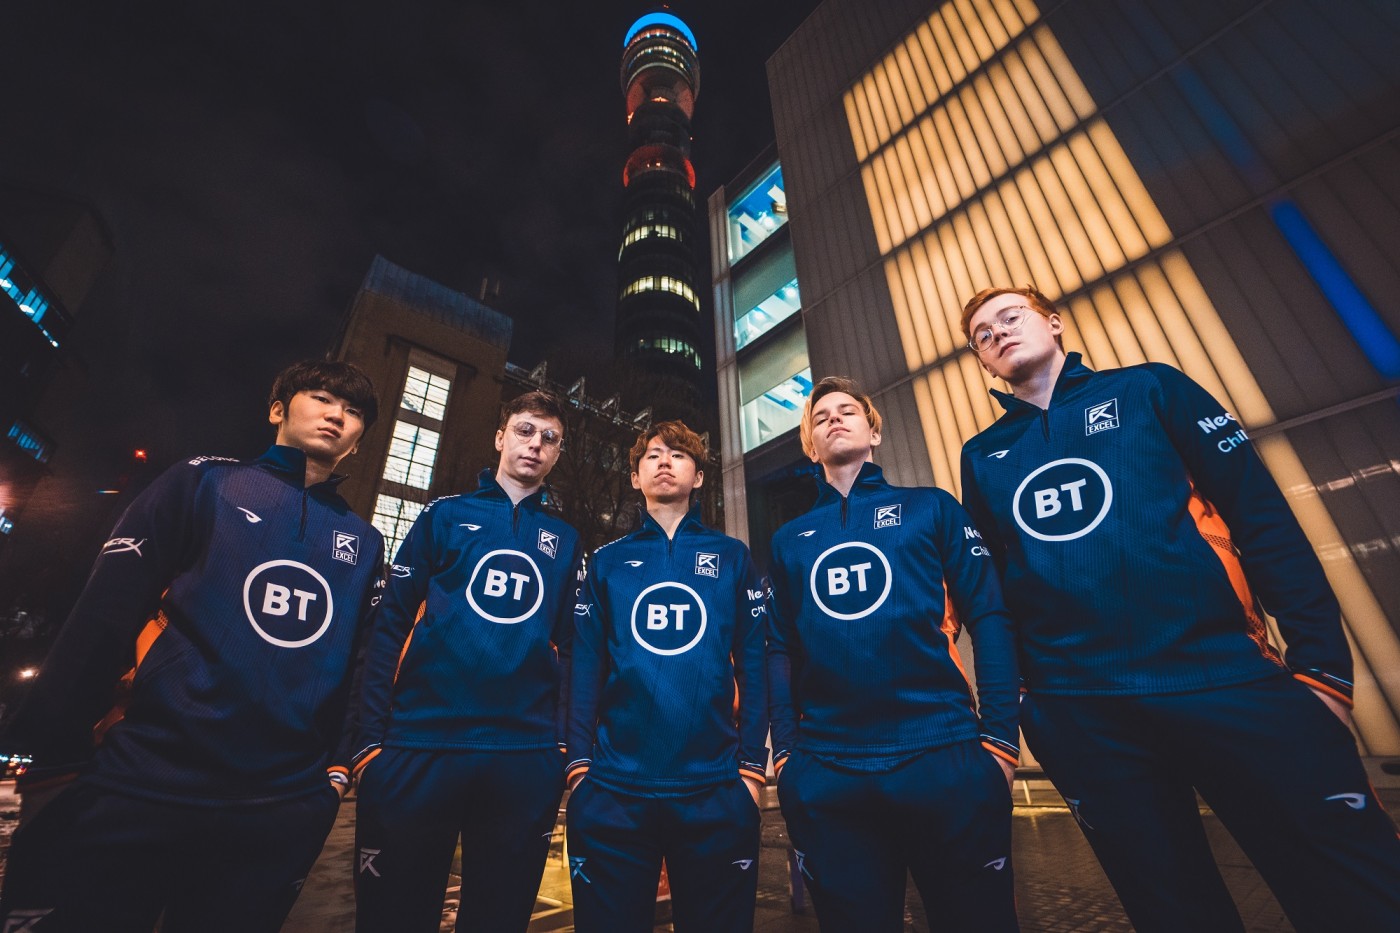 Excel Esports players in BT sponsored kit